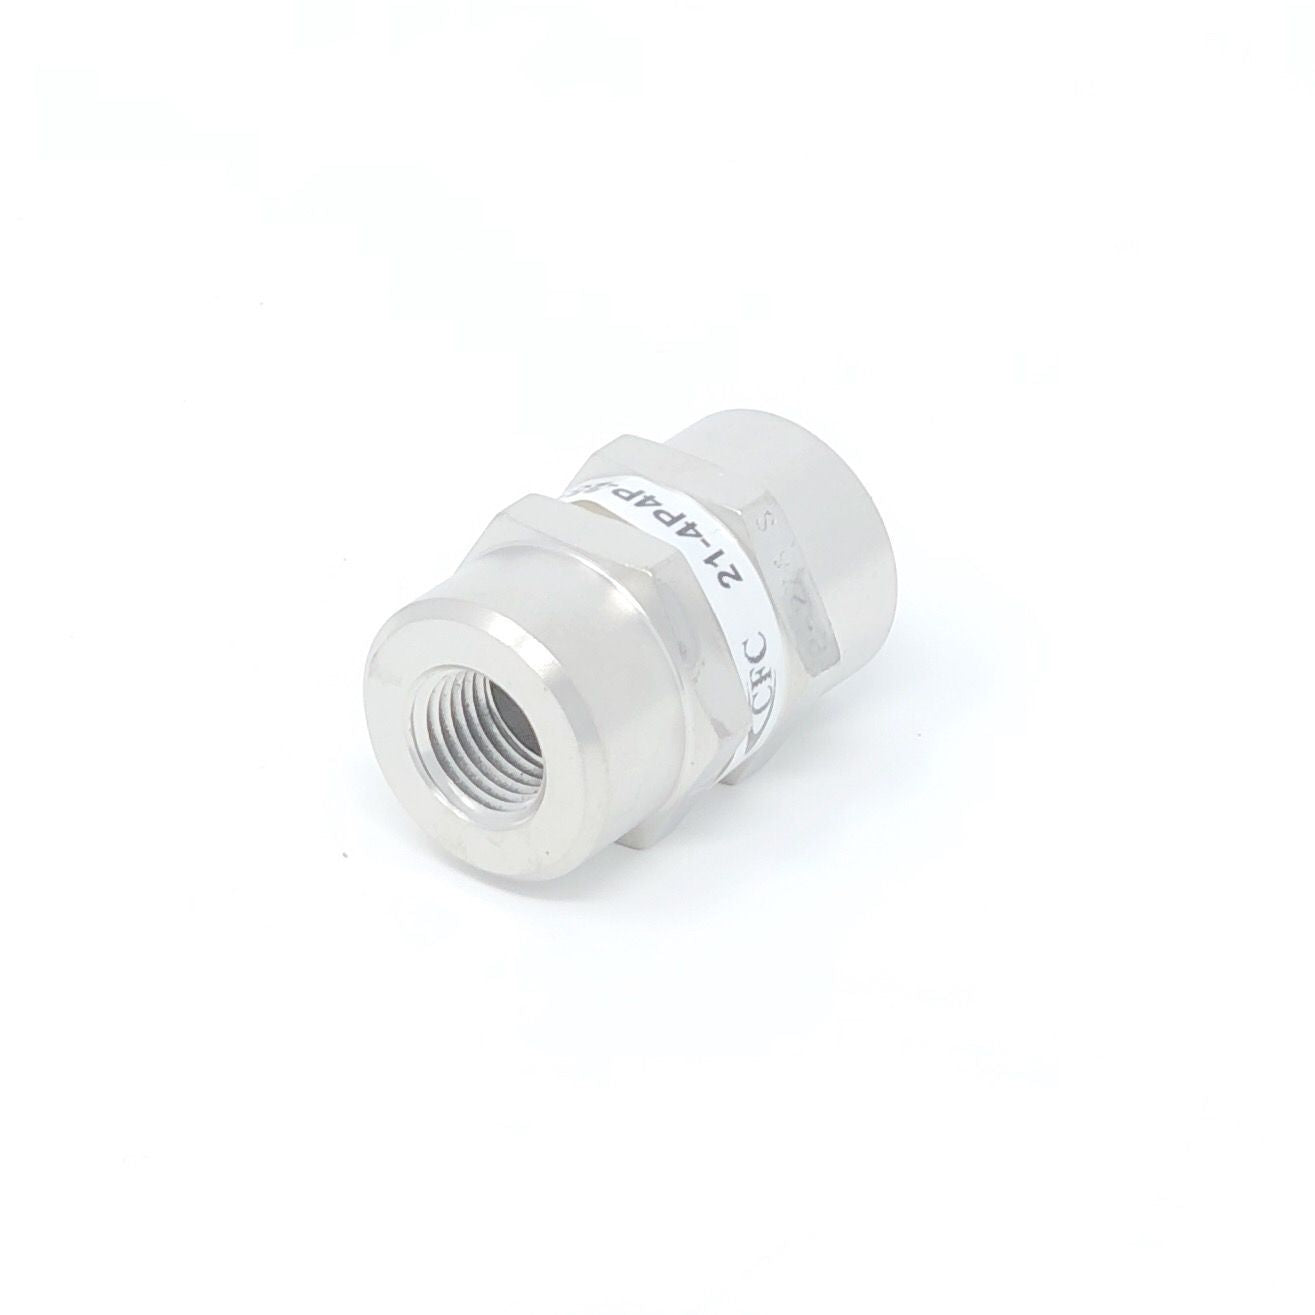 21-8N8N-25S : Chase High Pressure Inline Filter, 3000psi, 1/2" NPT, 25 Micron, No Visual Indicator, No Bypass